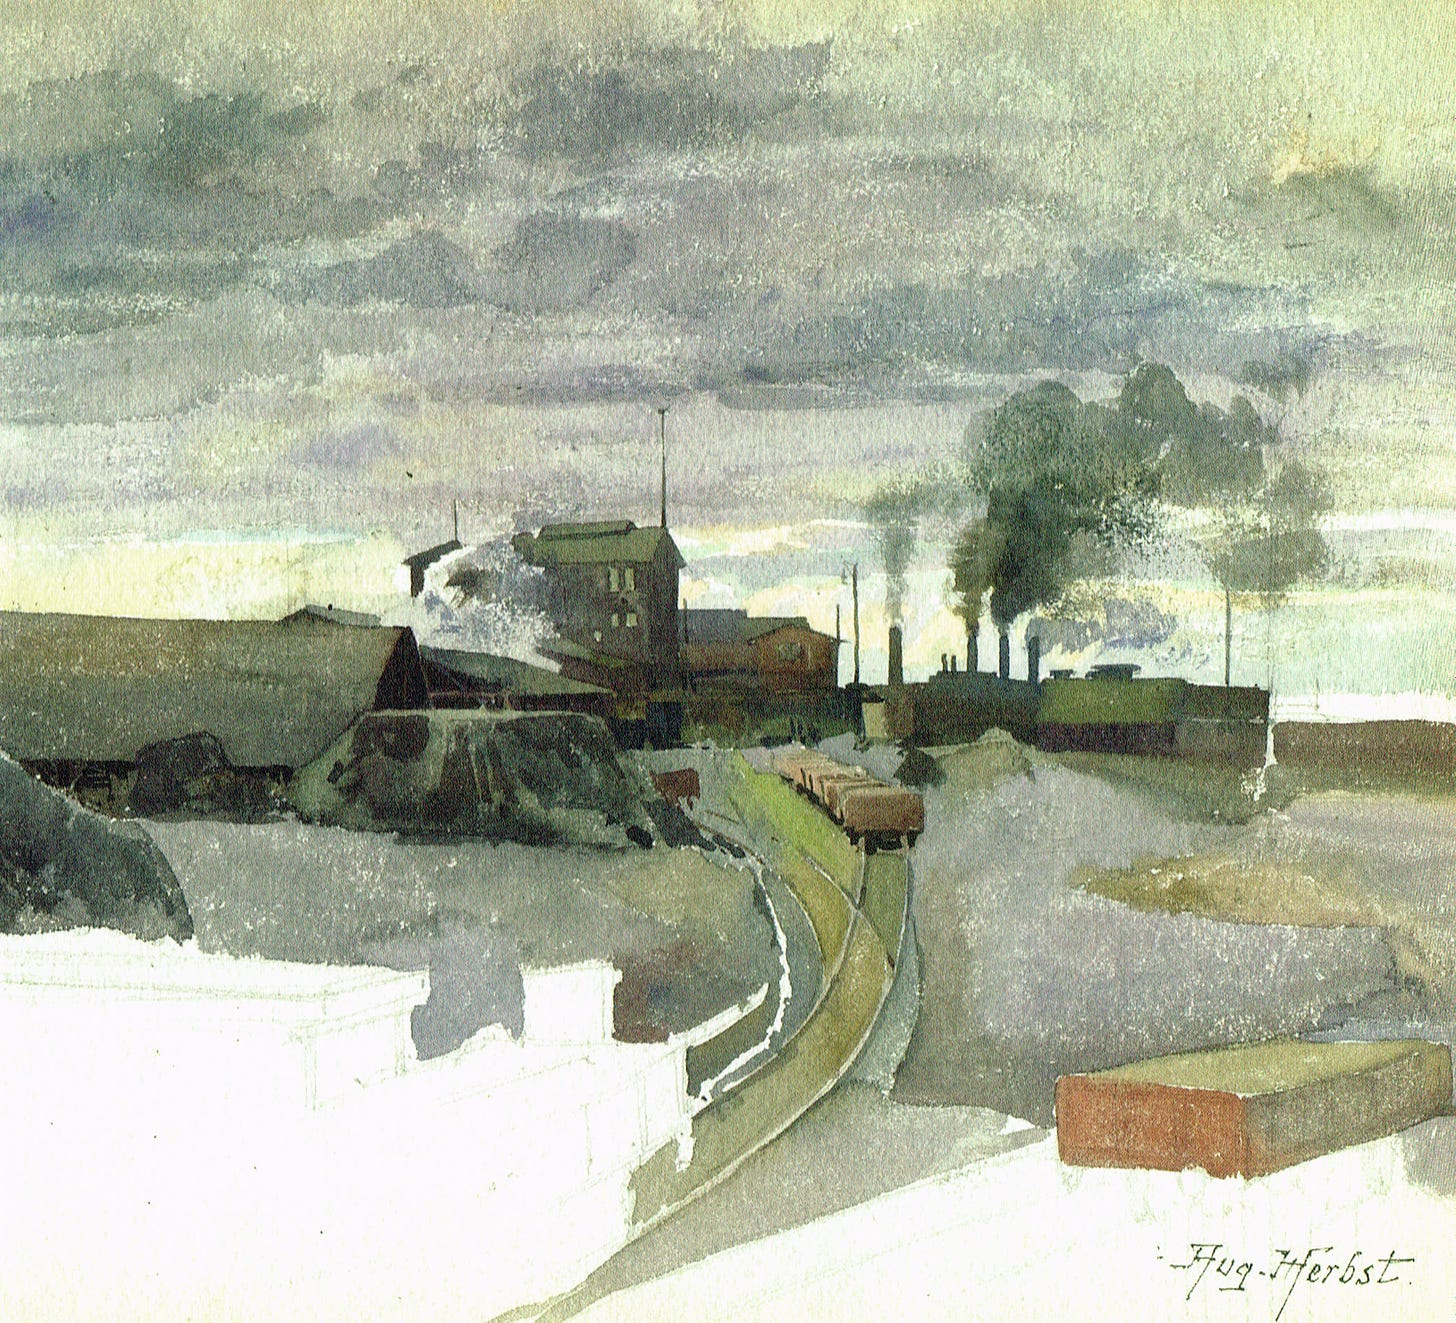 Auguste Herbst, Industrial landscape, undated watercolour (© Hervé Donat 2015). The factory looks closely to the Solvay one in Dombasle, as depicted on the La Soude vase, from a Herbst composition.